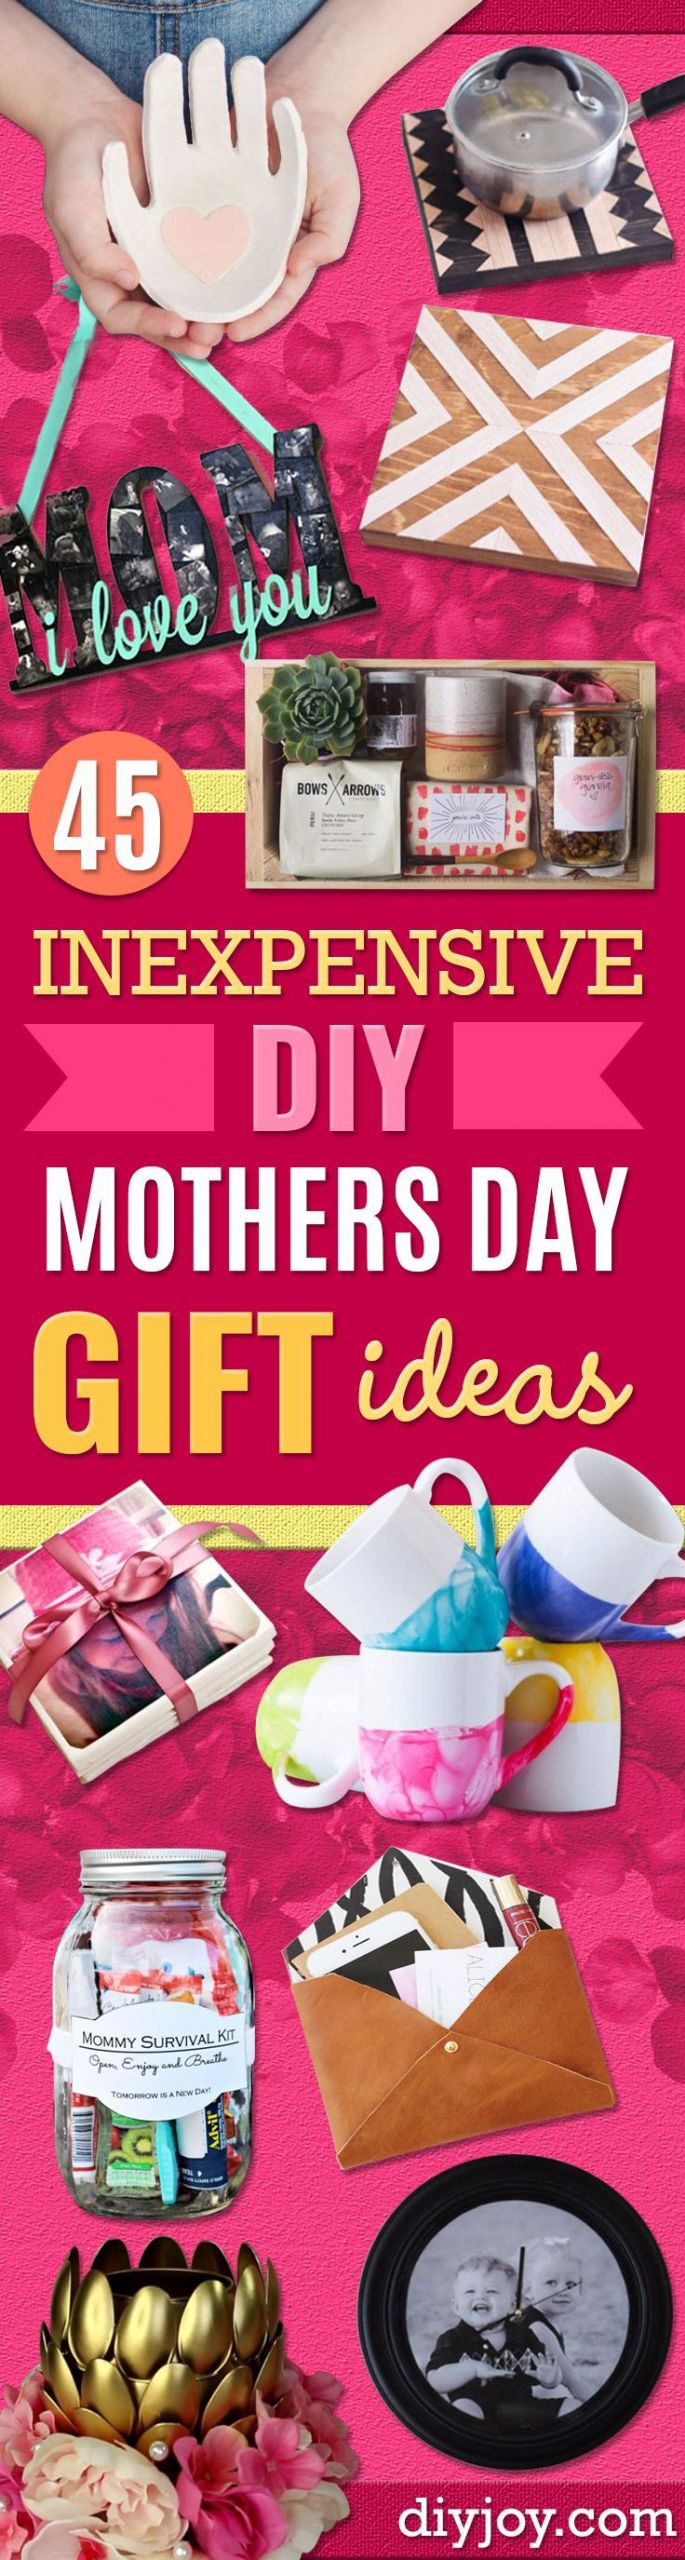 Cheap Birthday Gifts For Mom
 45 Inexpensive DIY Mothers Day Gift Ideas